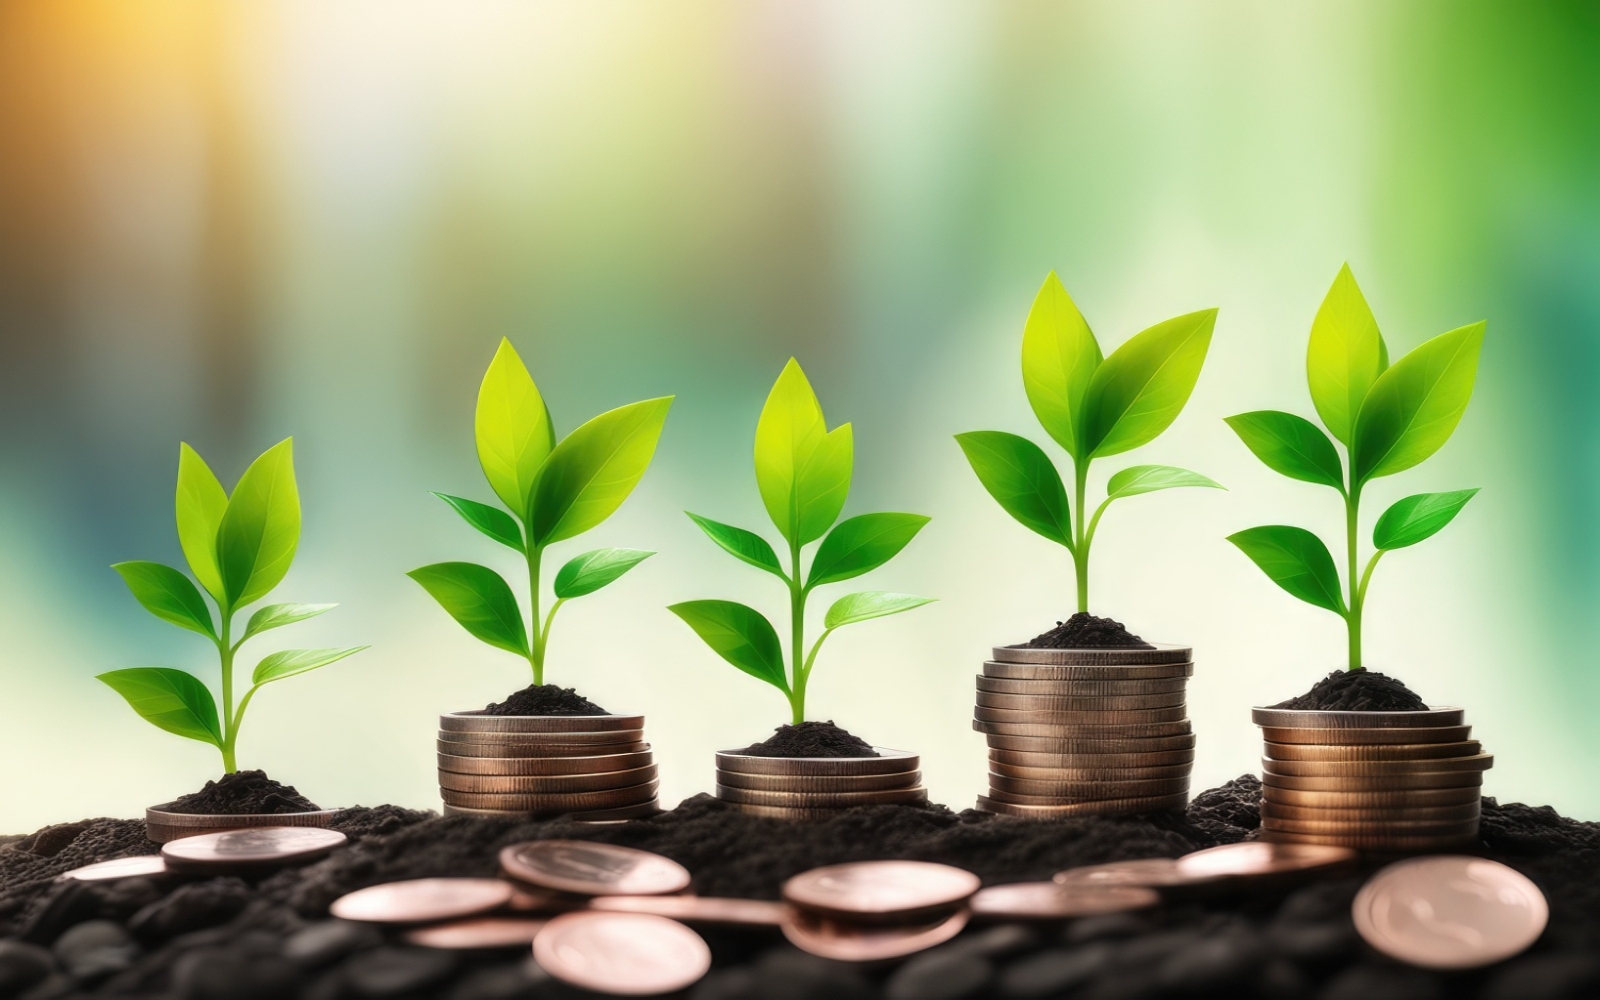 Premium Business Growing Plants on Coins Stacked on Green Blurred Background 18